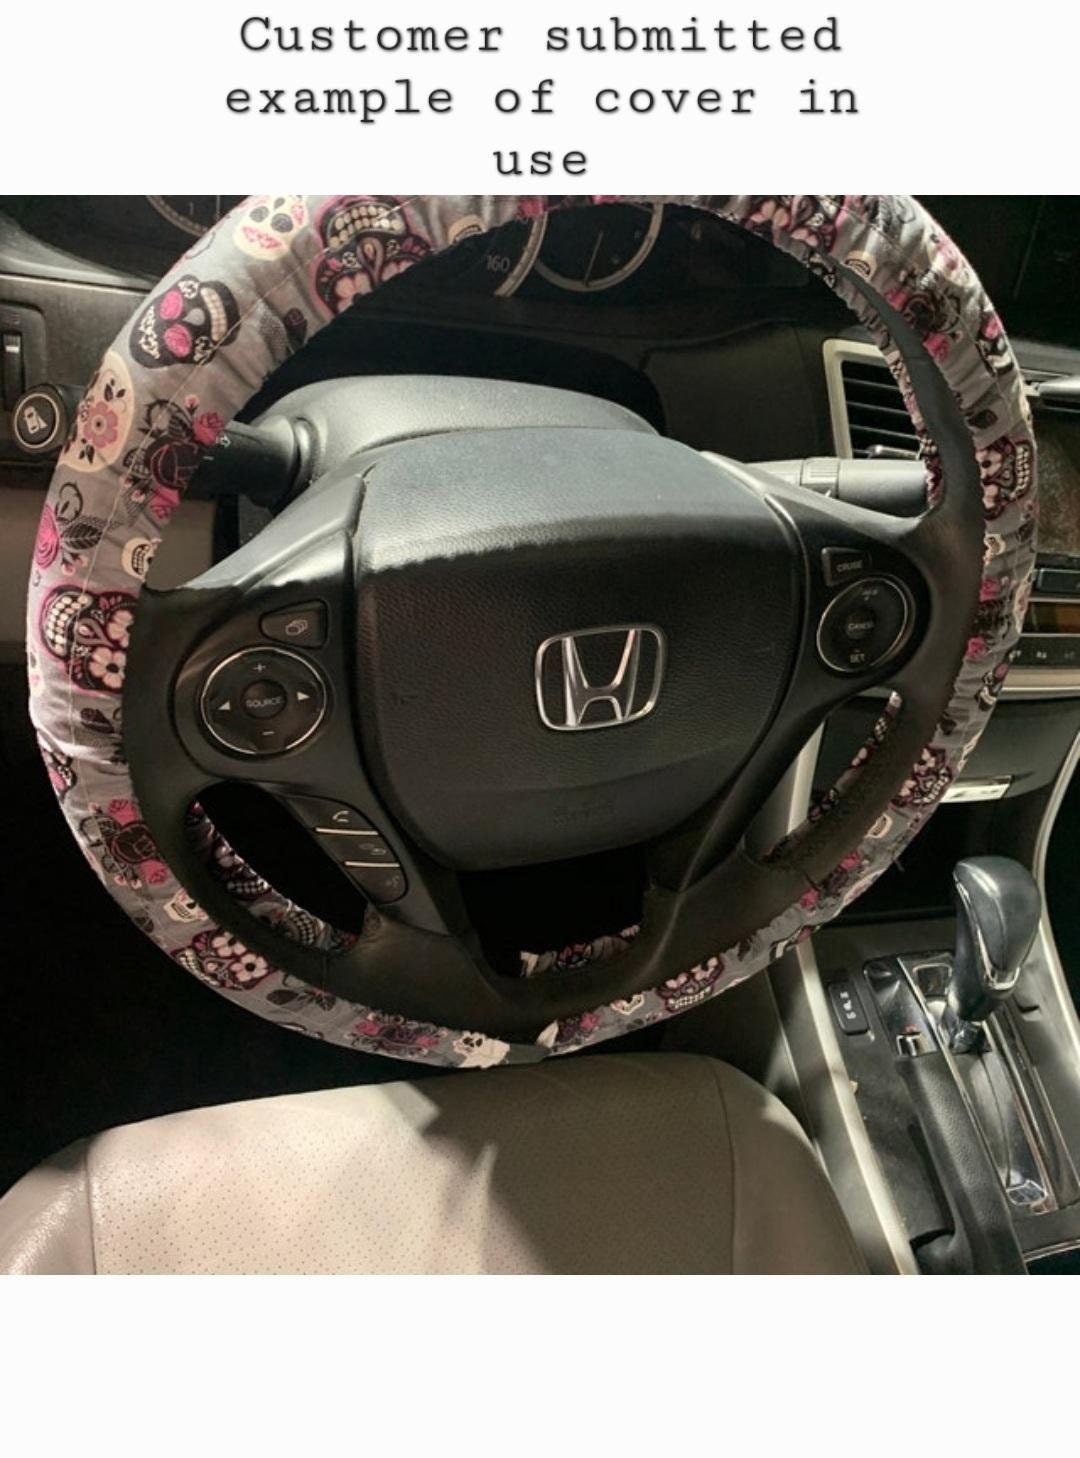 Up Steering Wheel Cover made with Licensed Disney Fabric, Handmade